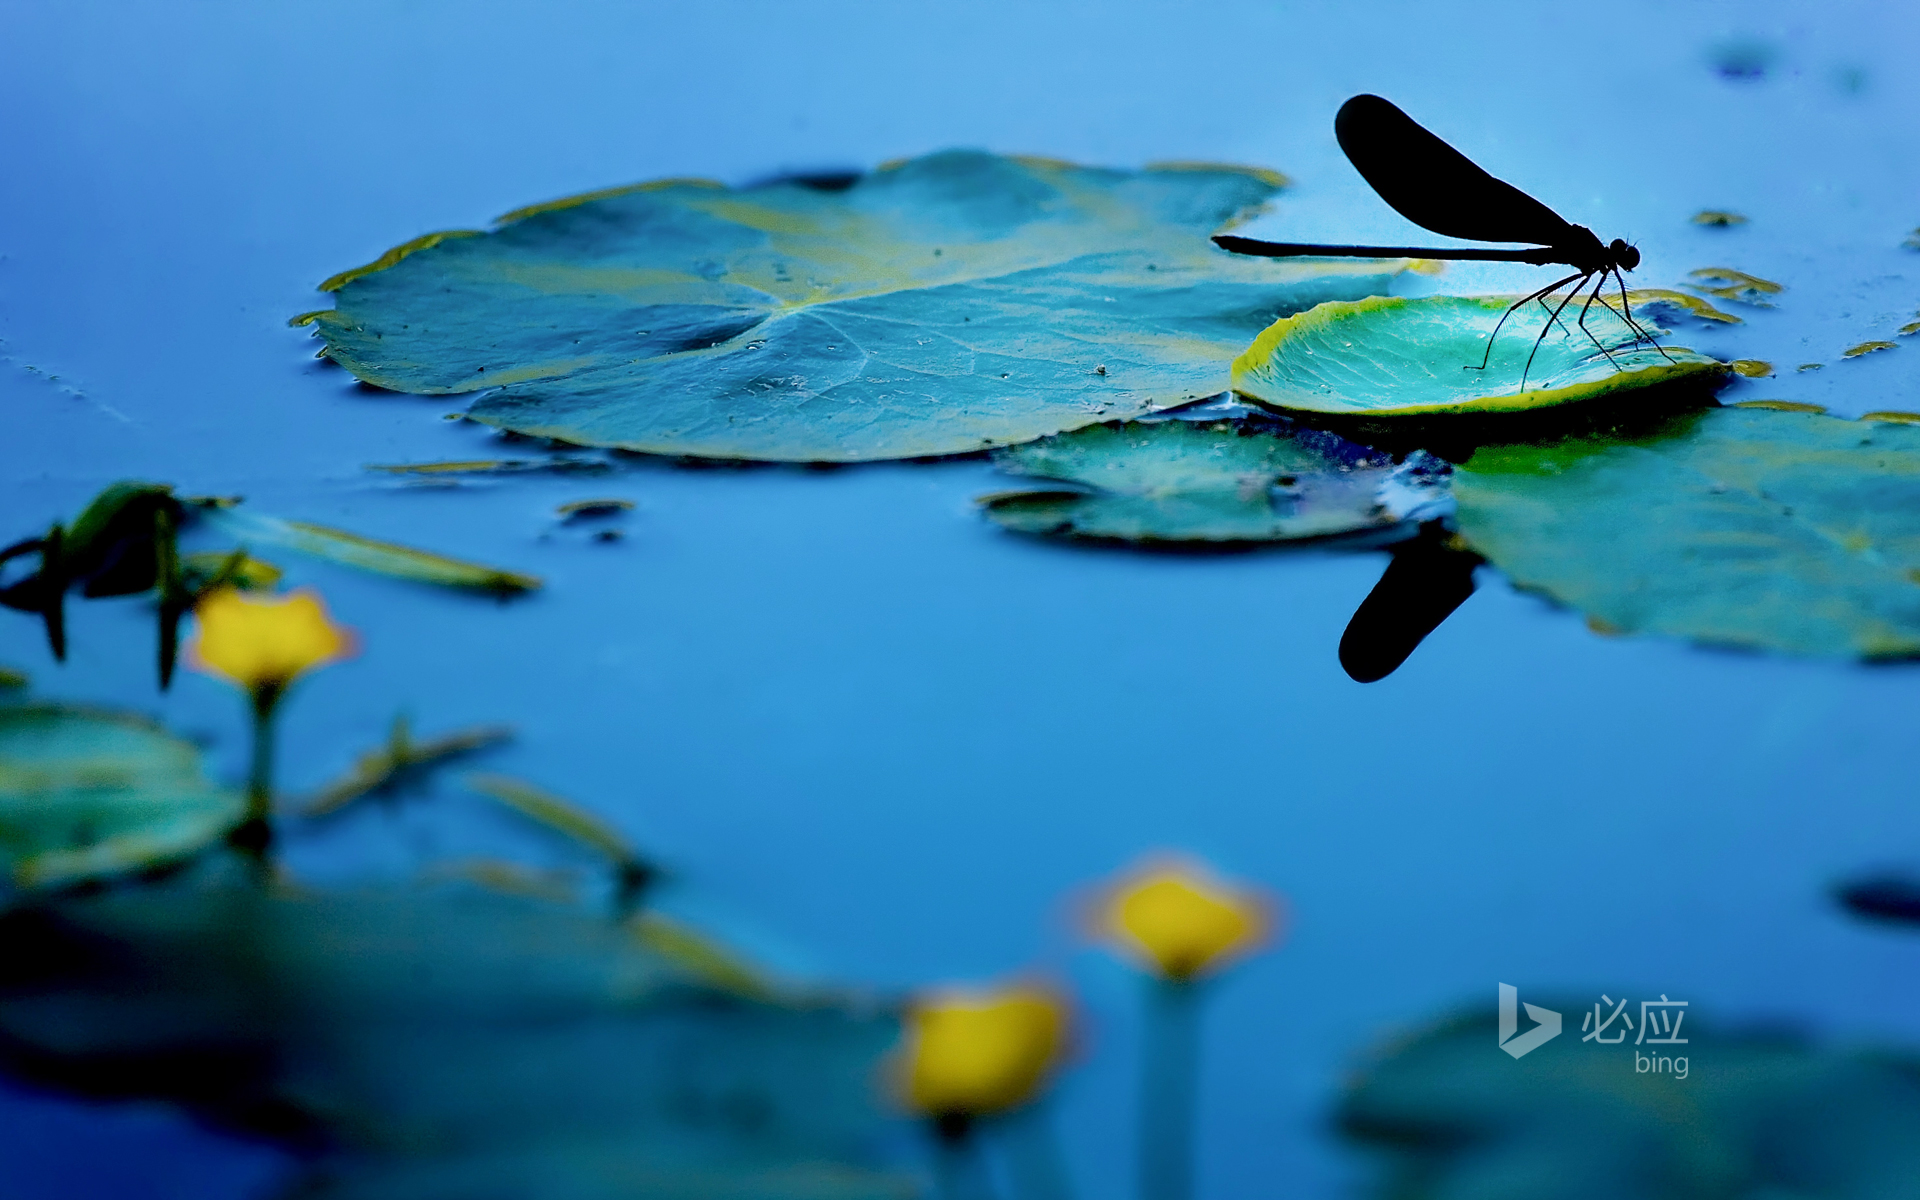 Archive Daily Full Resolution Bing Wallpaper Background S